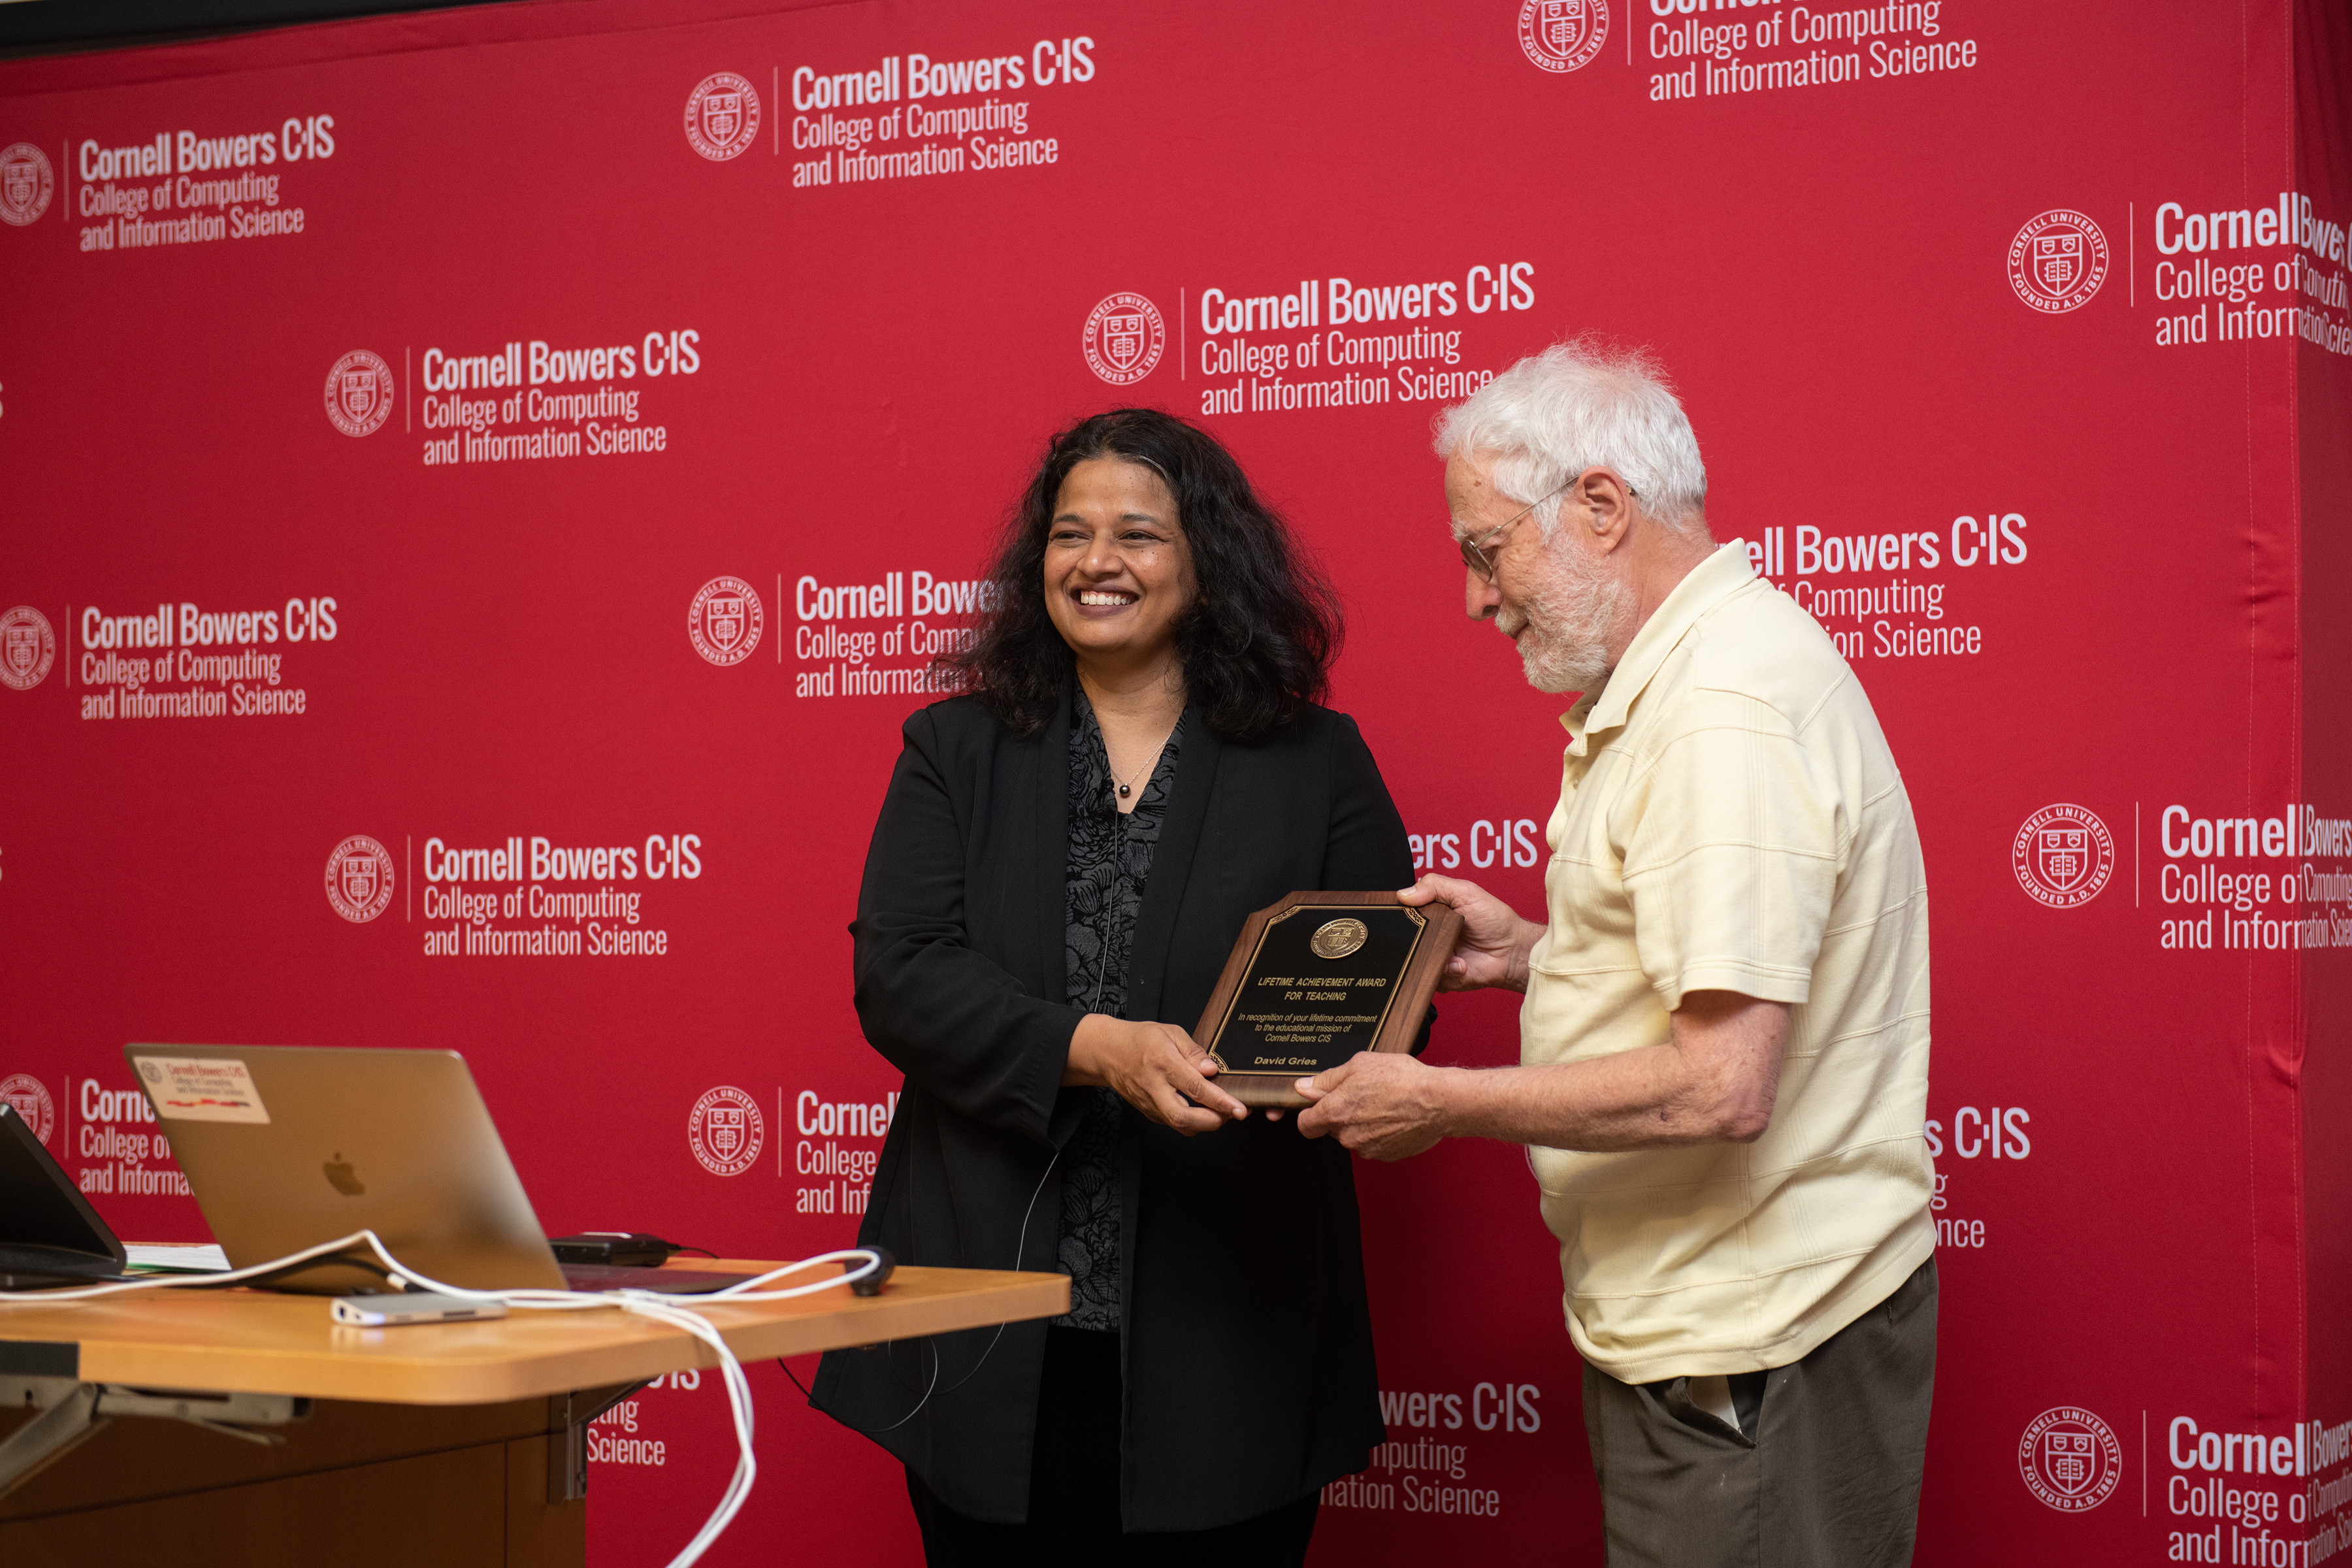 David Gries, retiring professor of computer science, was named recipient of the college’s first Lifetime Achievement Award in Teaching.